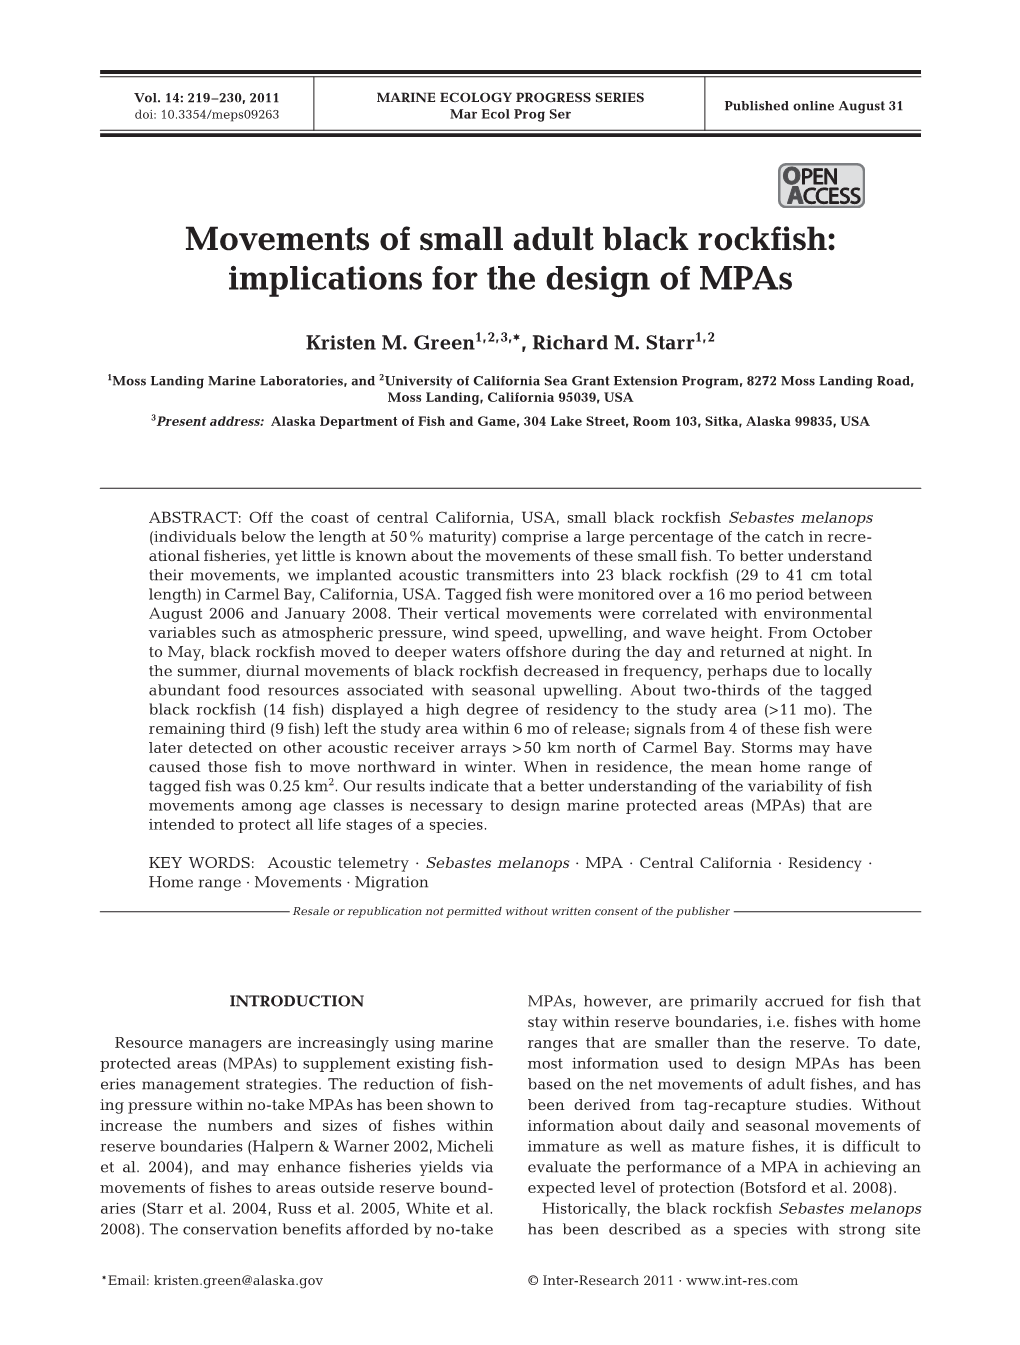 Movements of Small Adult Black Rockfish: Implications for the Design of Mpas